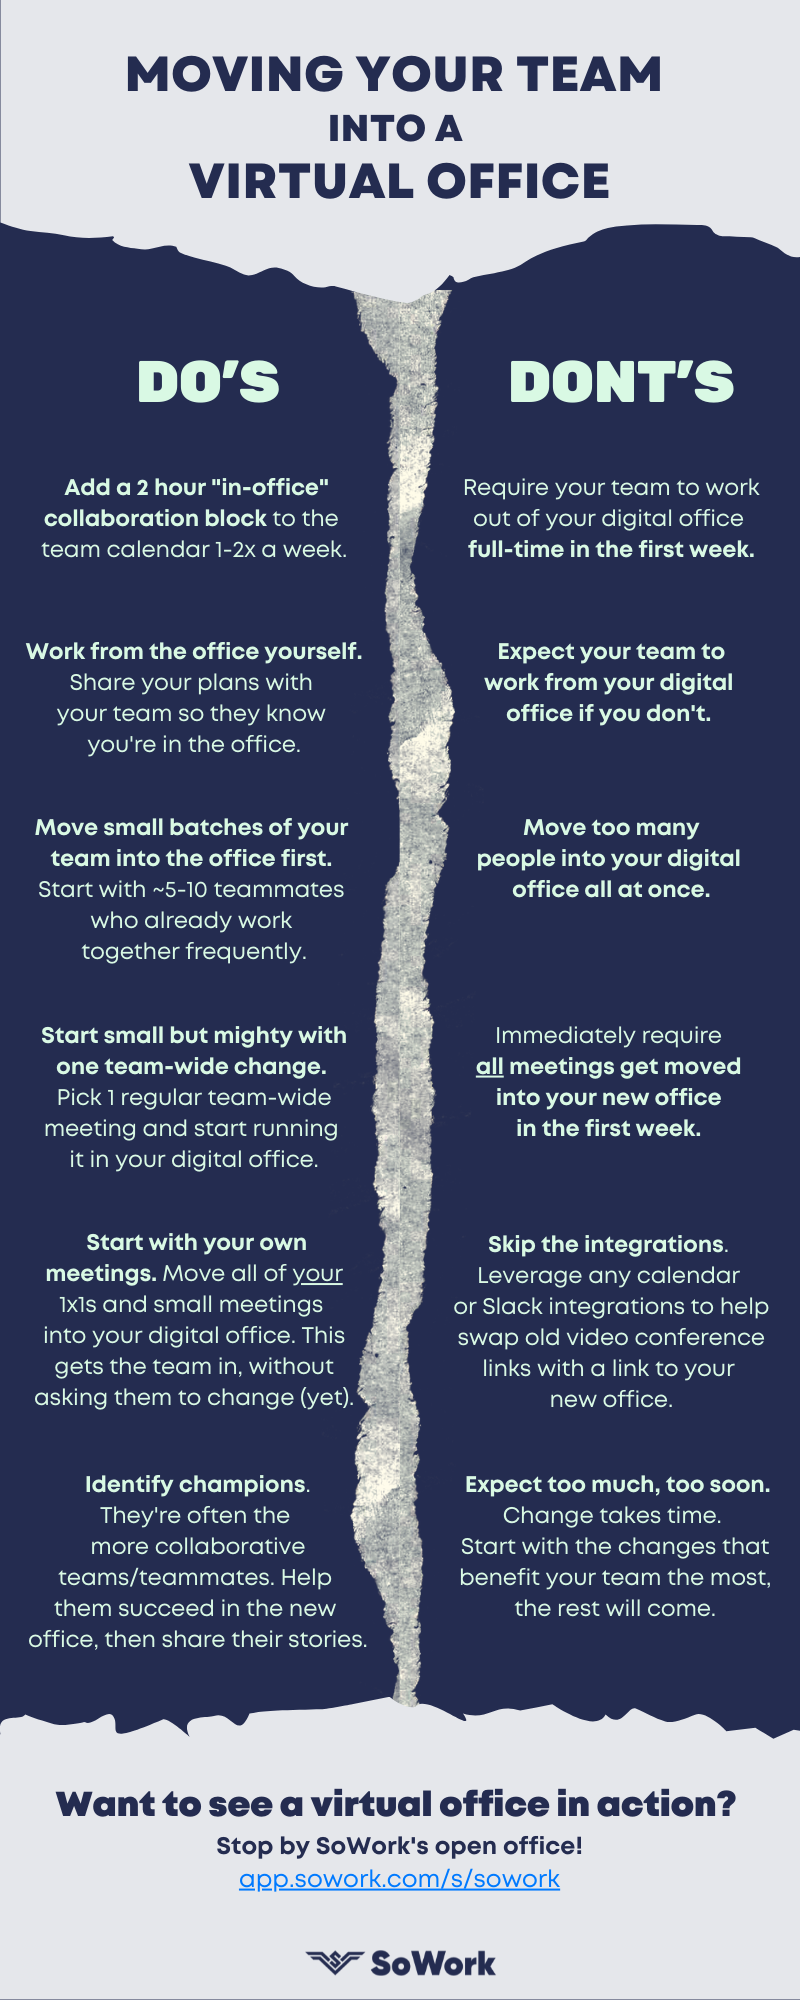 Infographic showcasing a list of Do's and Dont's when moving your team into a virtual office